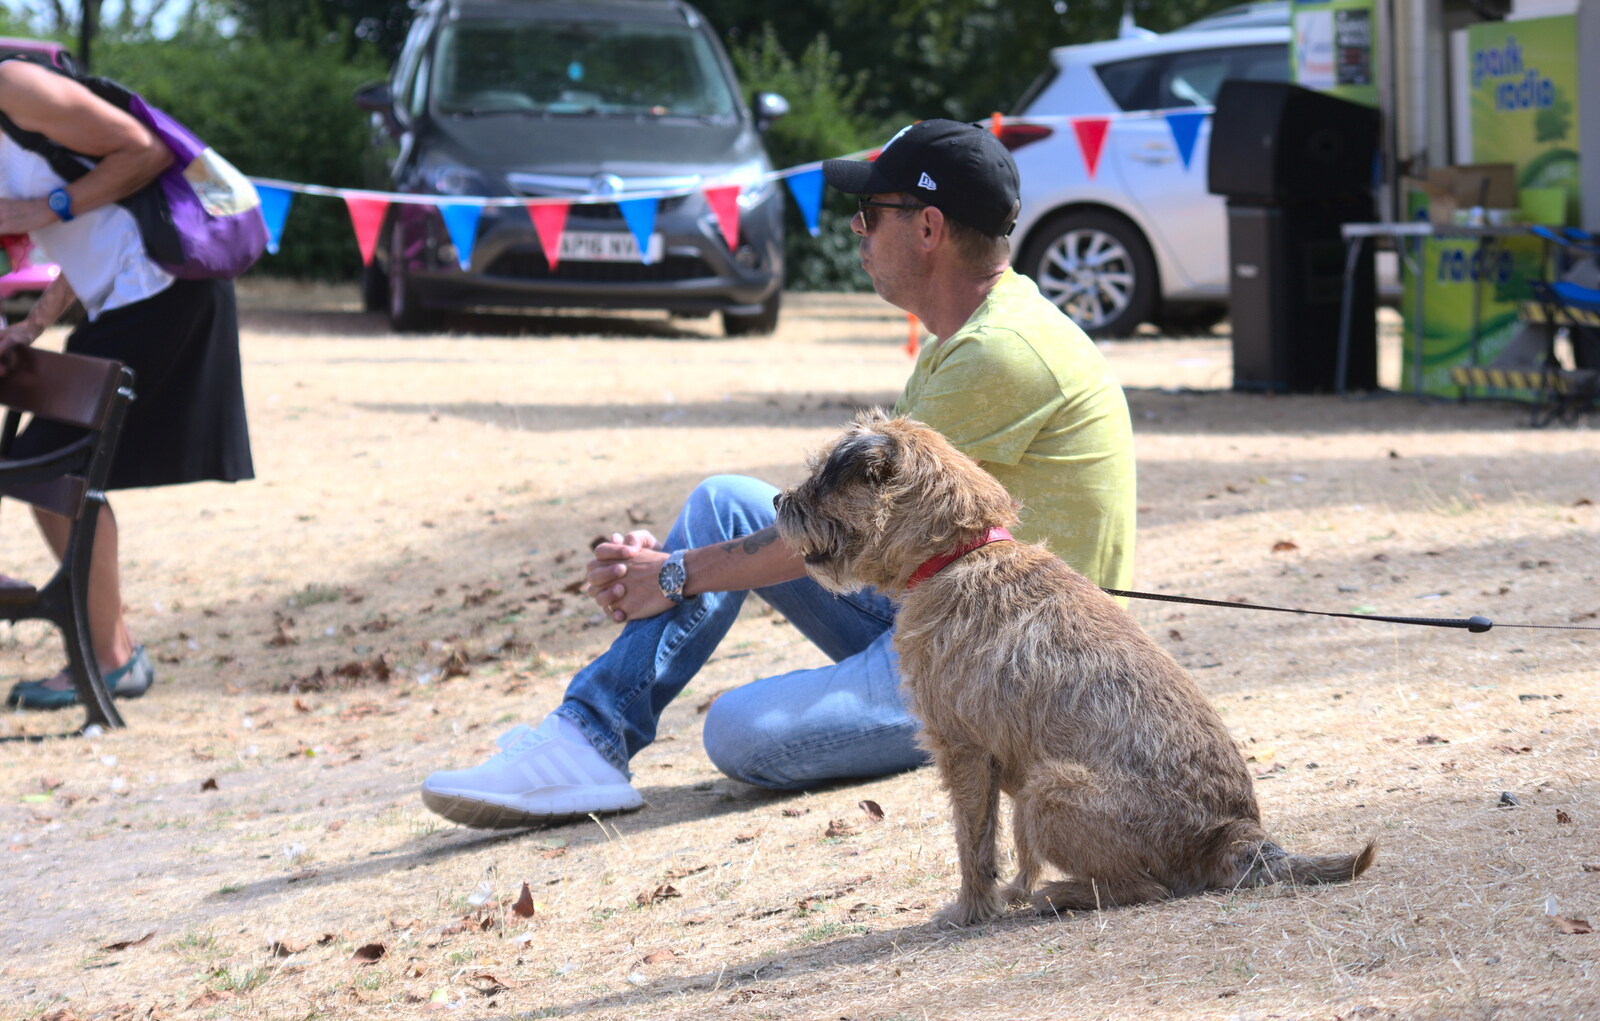 One man and his dog from Diss Fest, The Park, Diss, Norfolk - 22nd July 2018